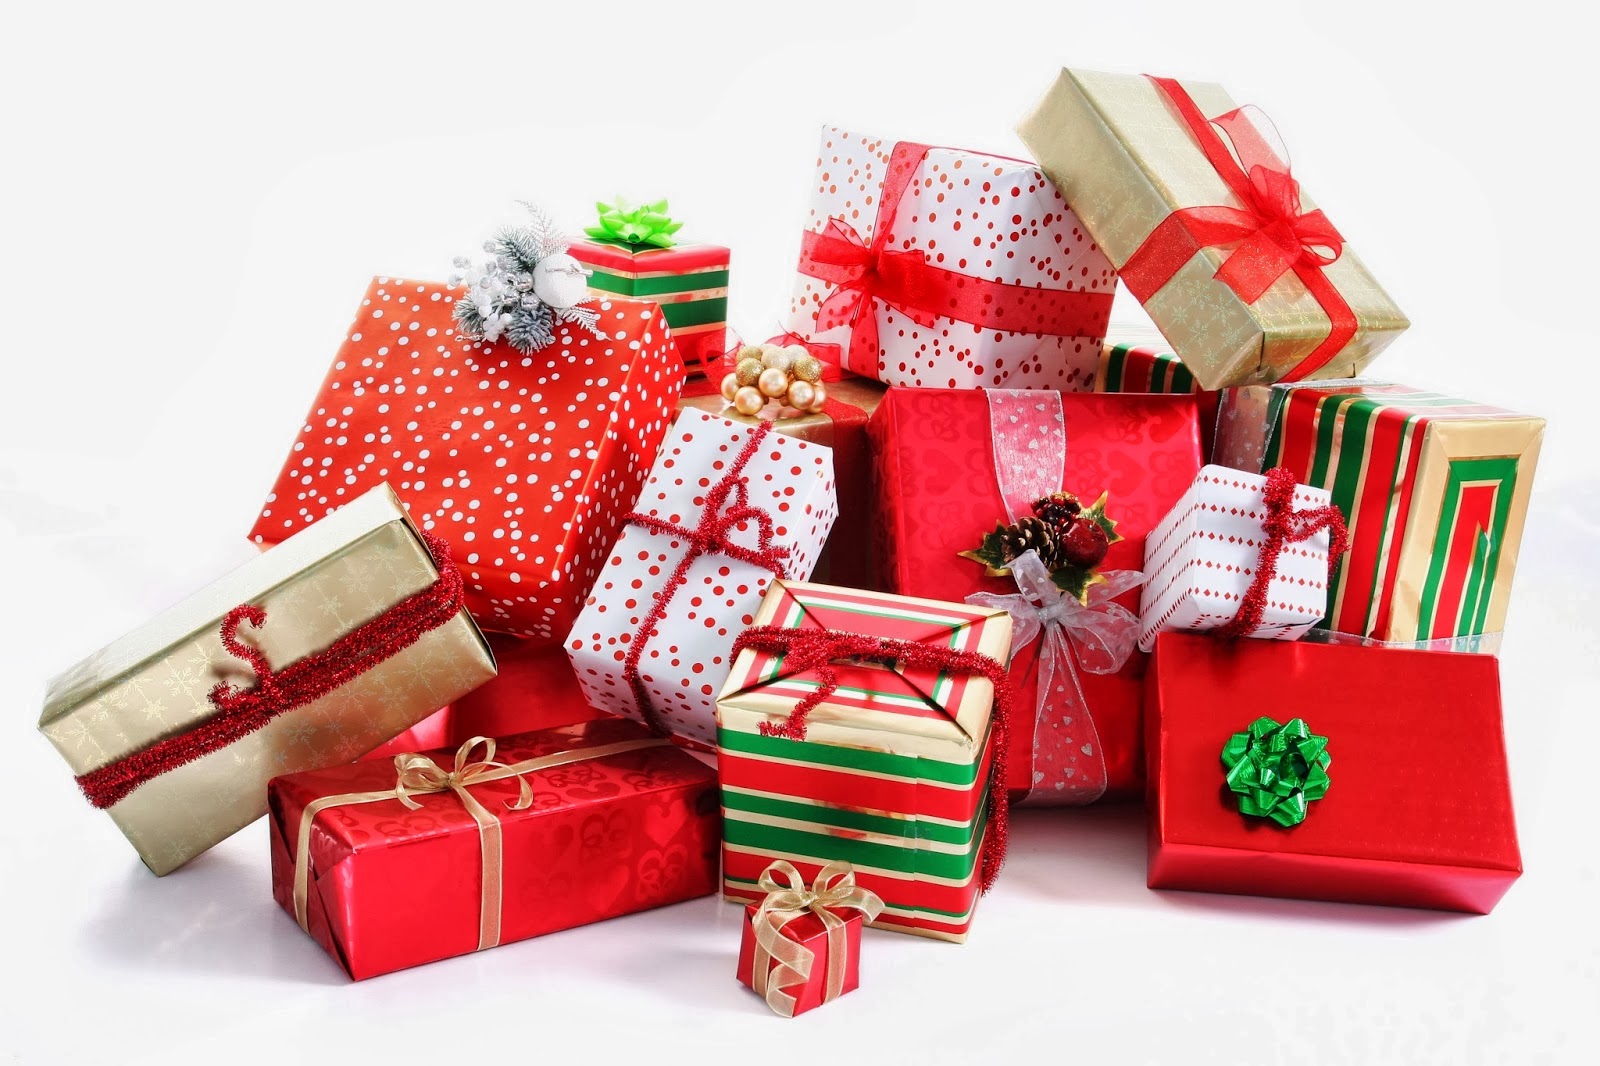 Christmas Gift Guide 2015: Best technology presents for 